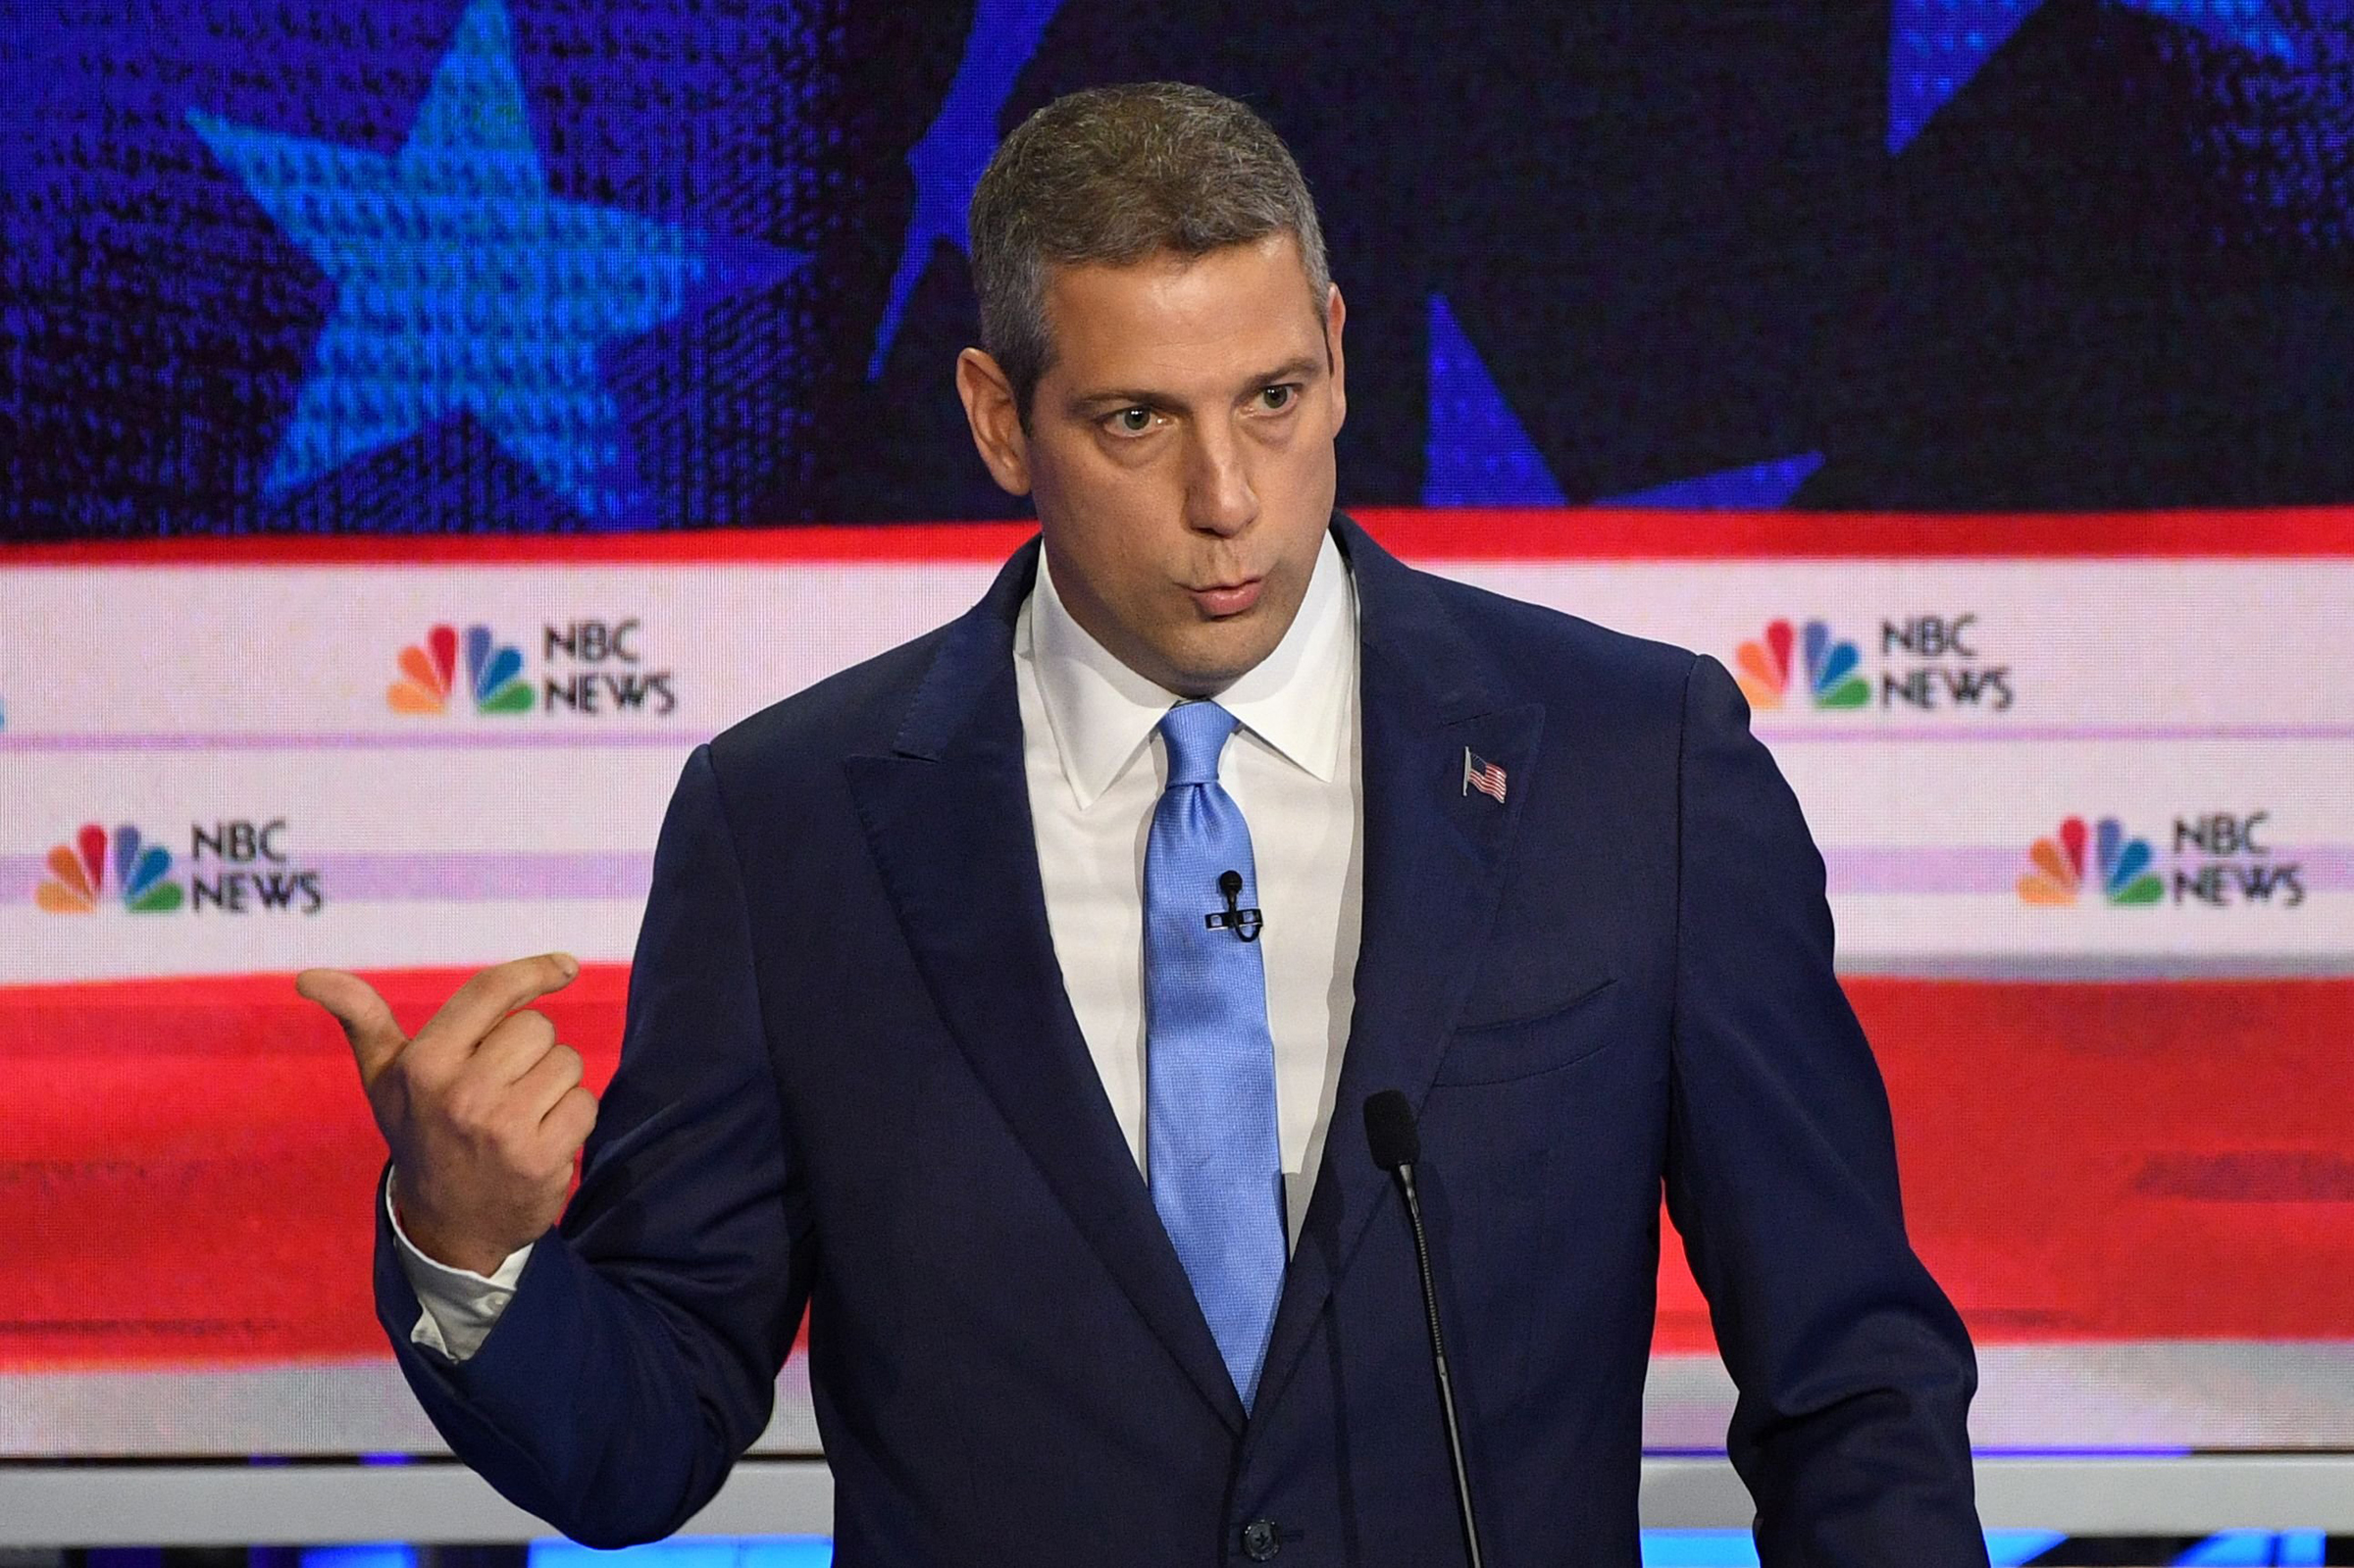 Democratic presidential hopeful US Representative for Ohio's 13th congressional district Tim Ryan speaks during the first Democratic primary debate of the 2020 presidential campaign season hosted by NBC News at the Adrienne Arsht Center for the Performing Arts in Miami, Florida, June 26, 2019. (Jim Watson—AFP/Getty Images)